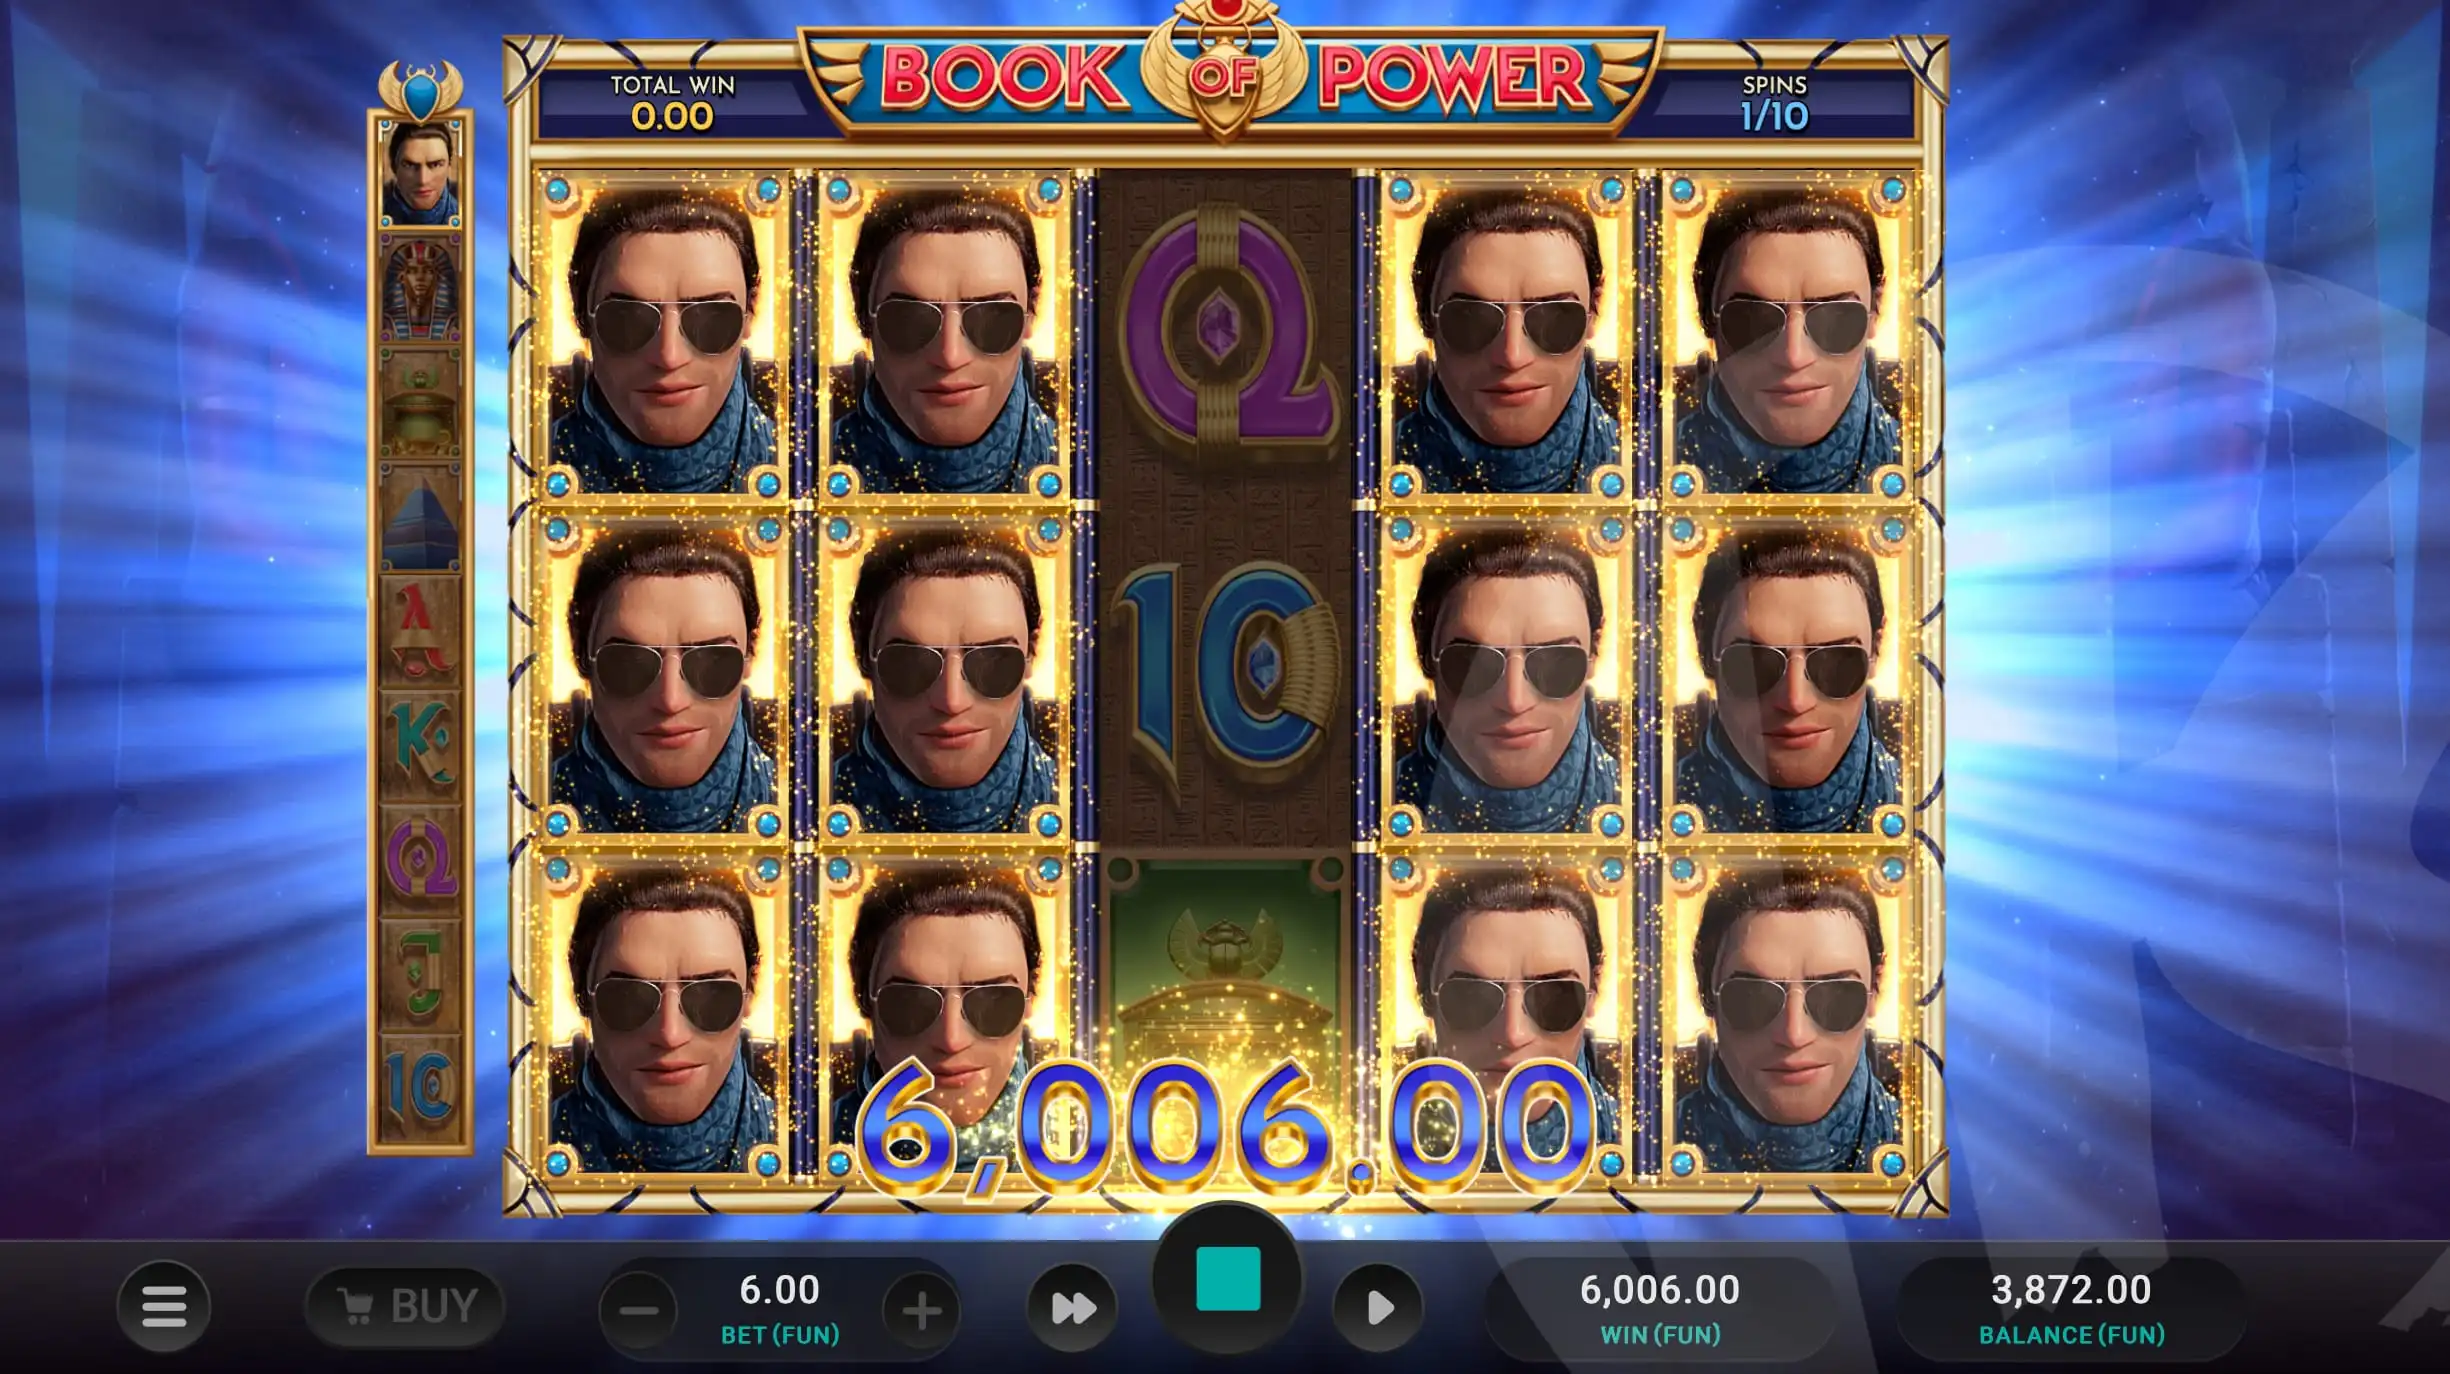 Book of Power Free Spins